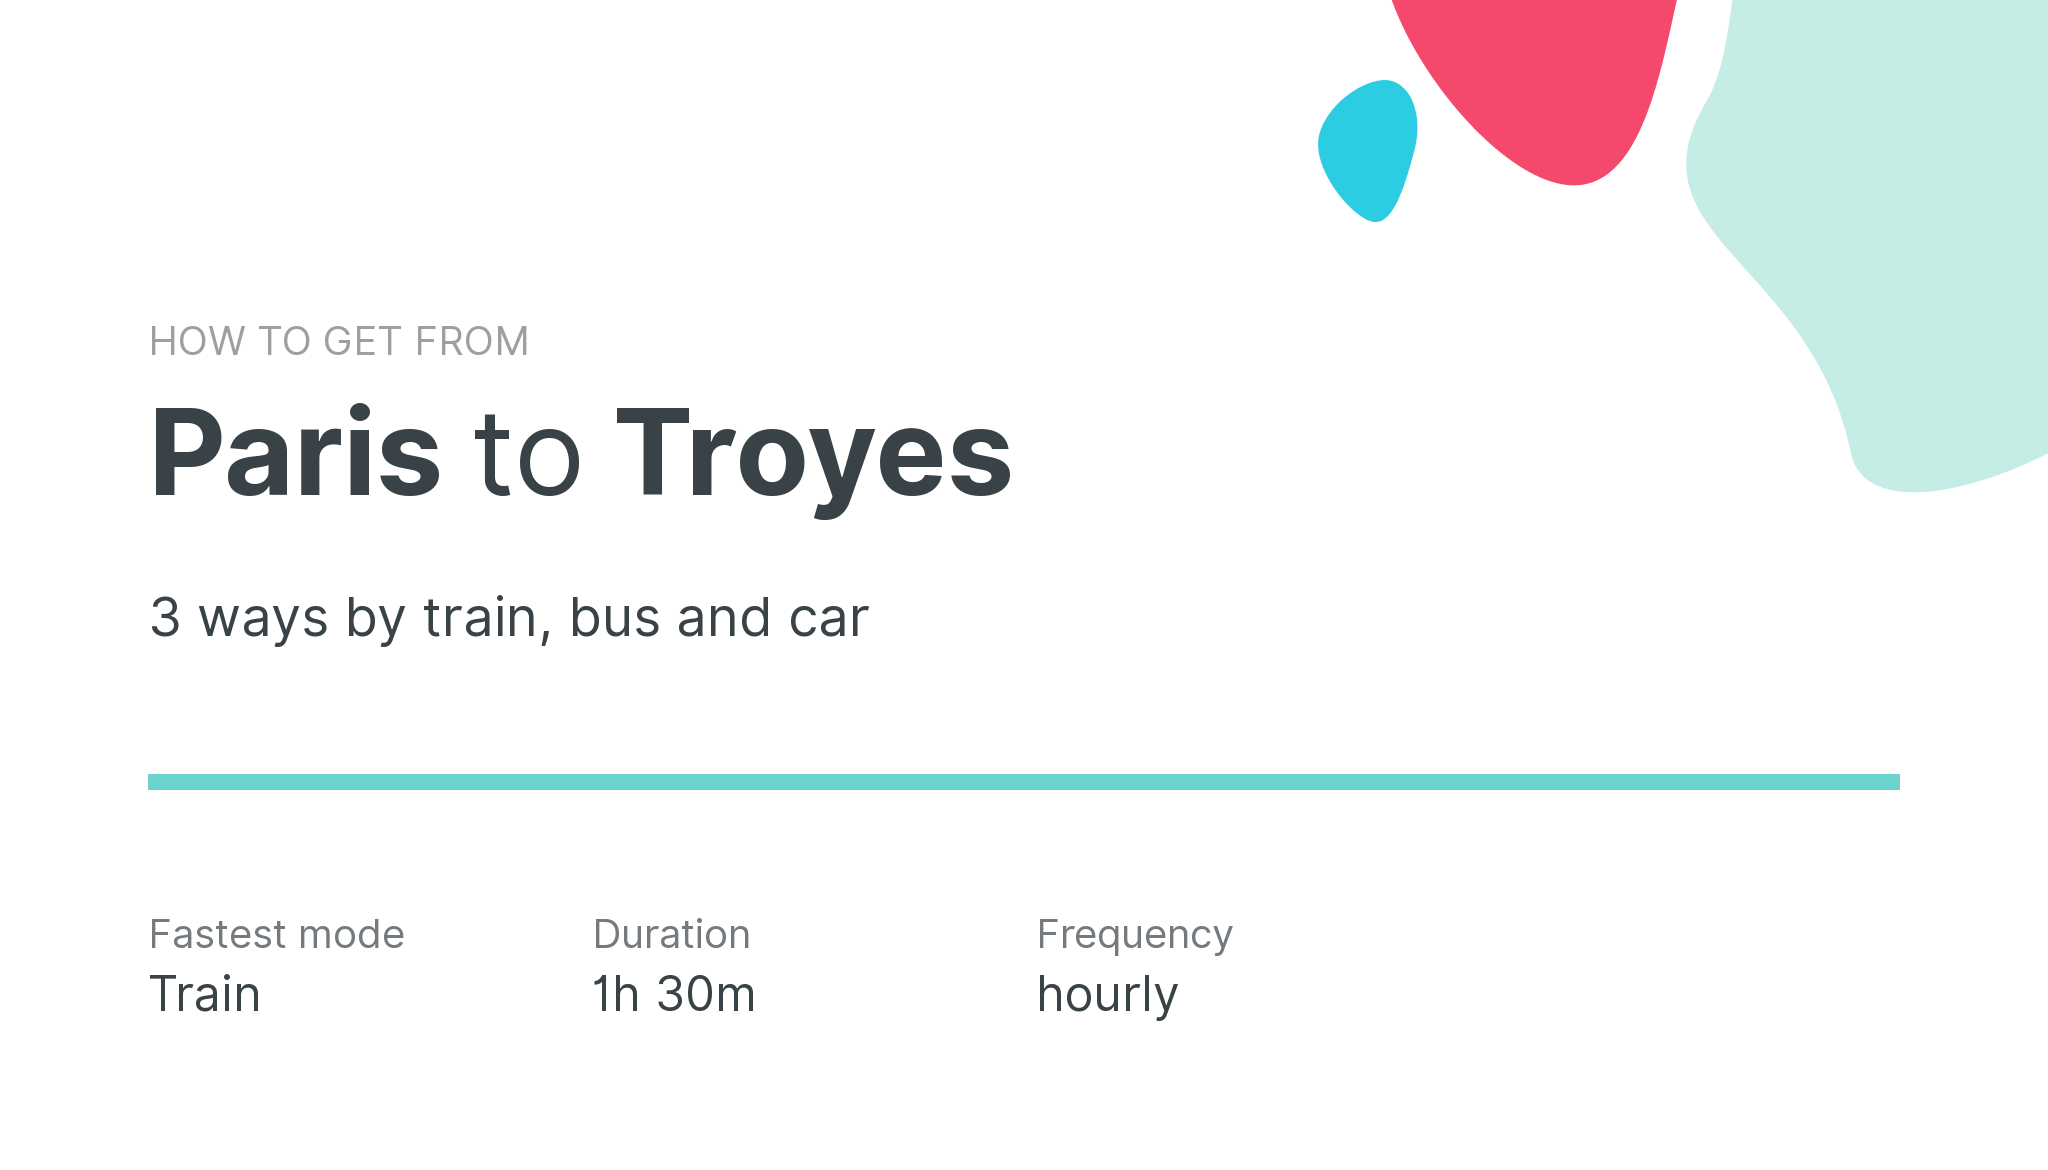 How do I get from Paris to Troyes